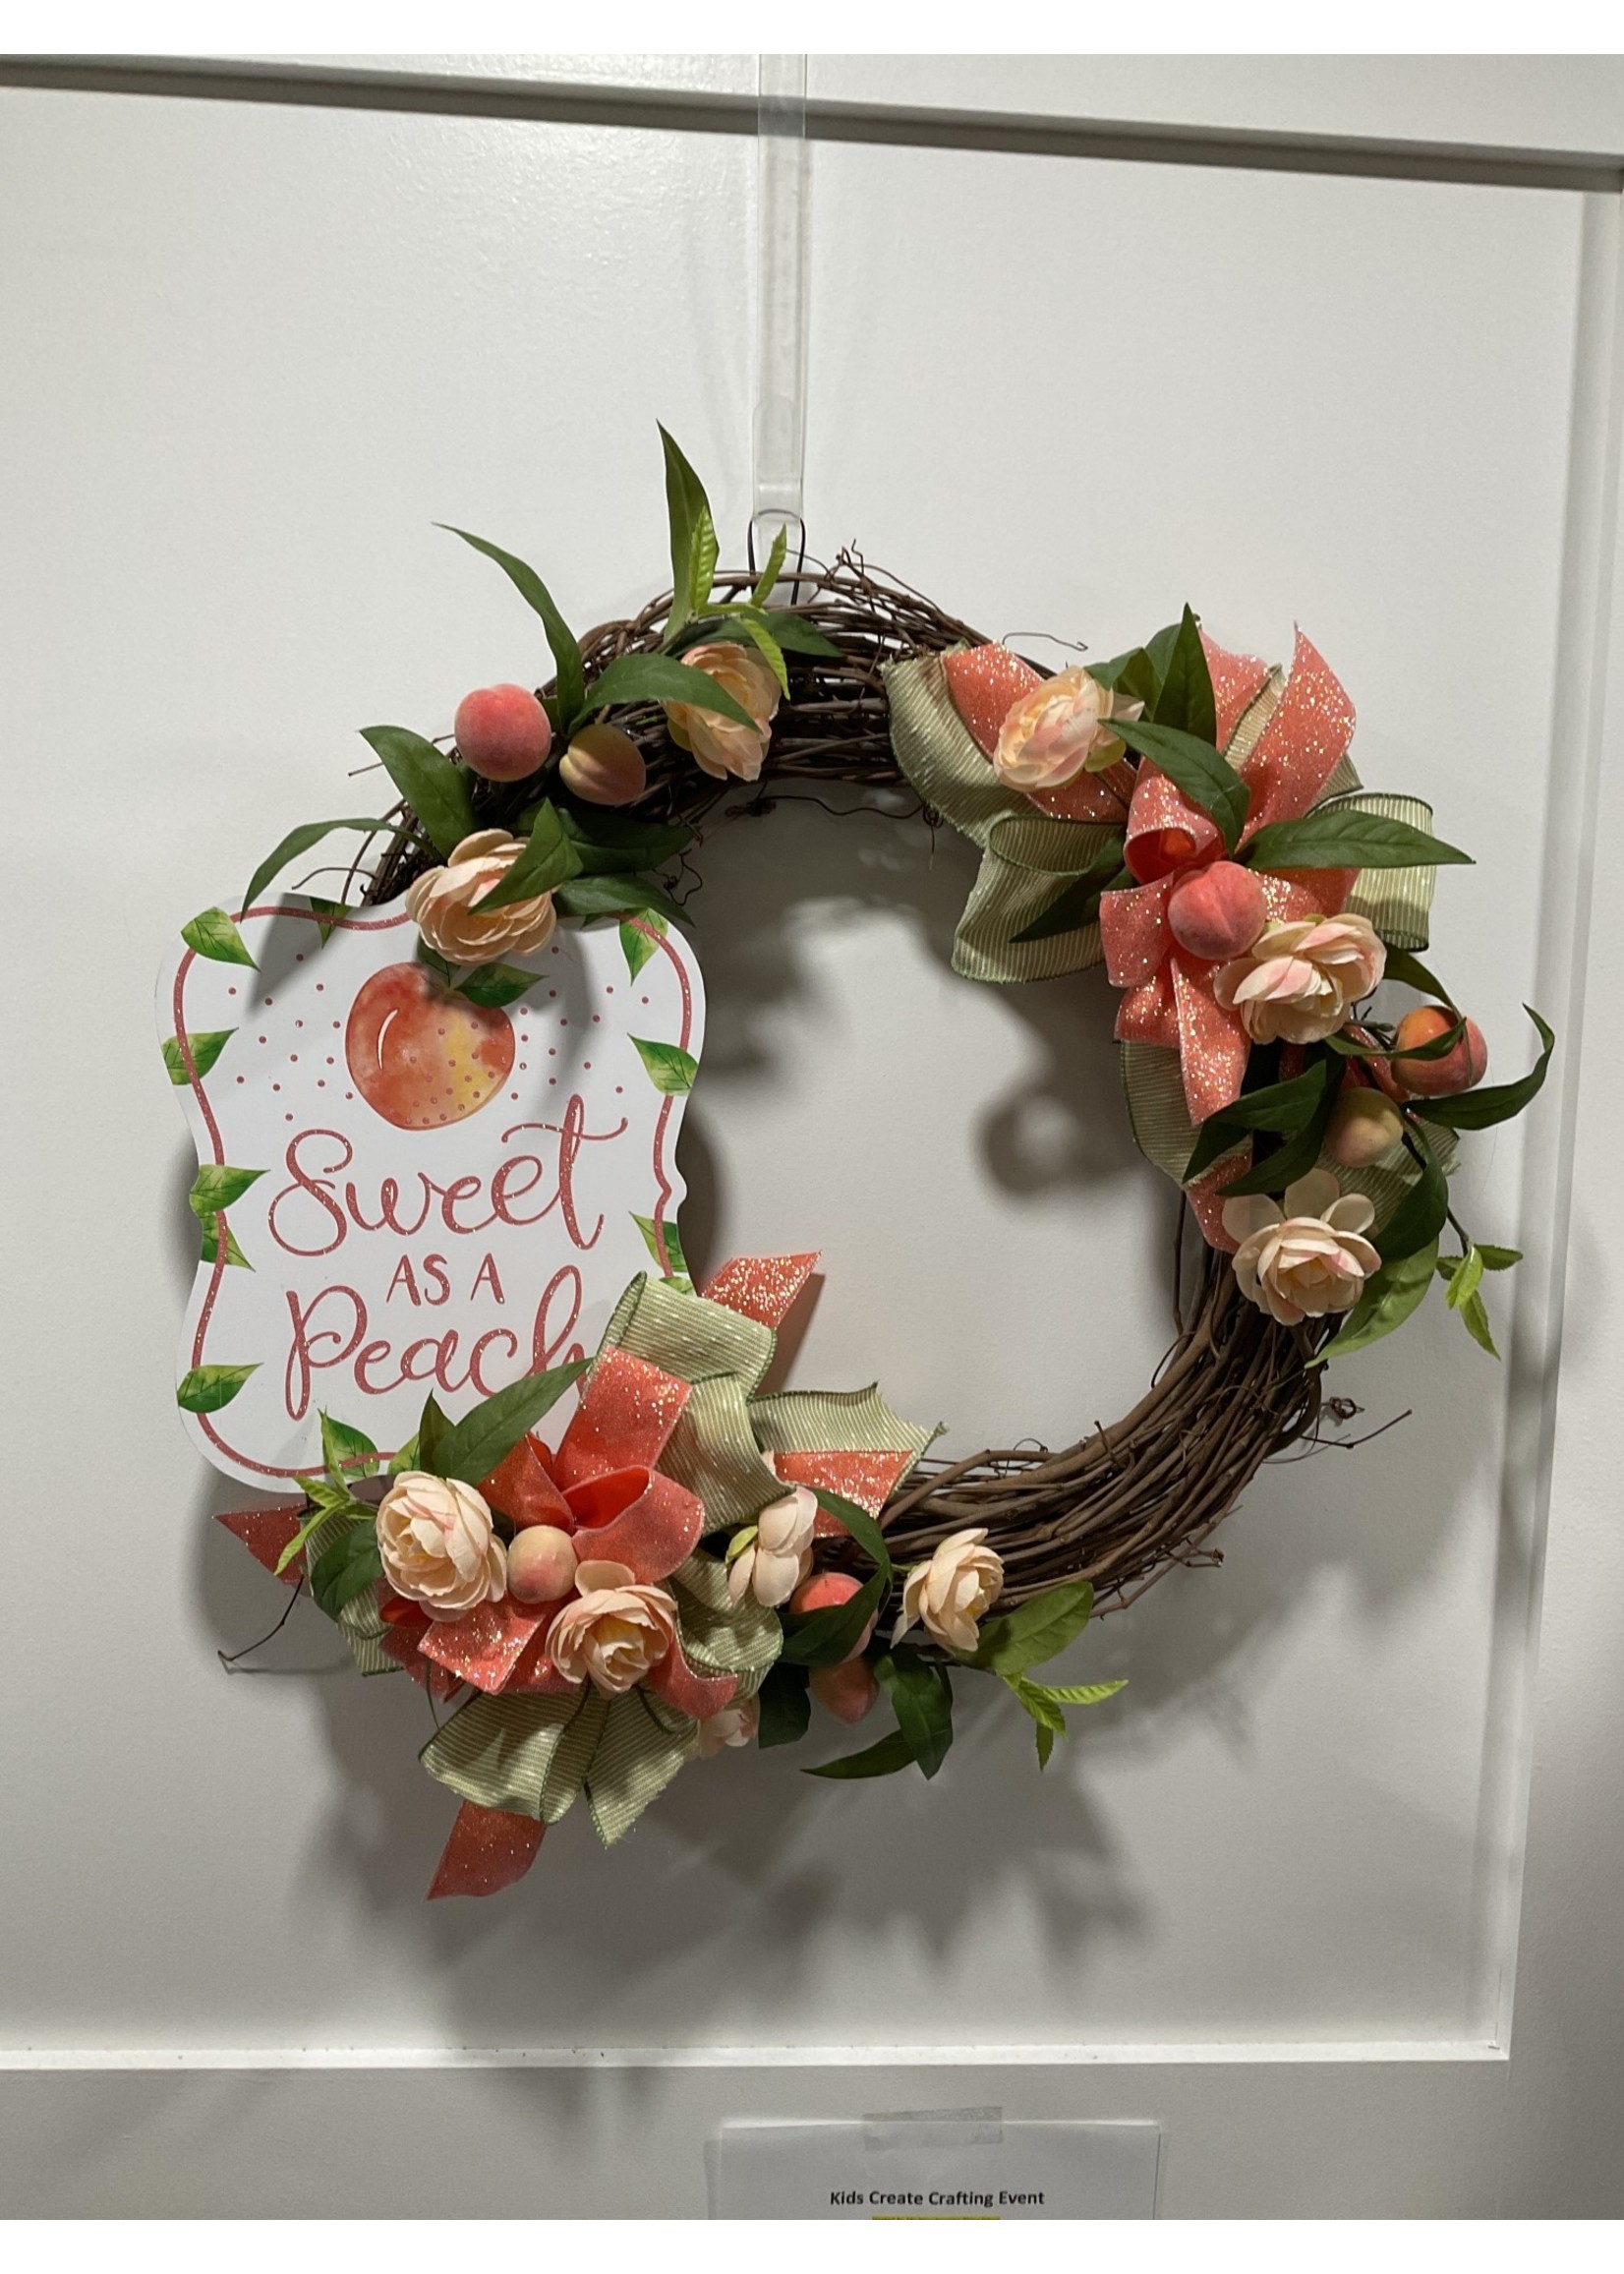 My New Favorite Thing Grapevine Wreath "Sweet as a Peach" with Peaches and Flowers